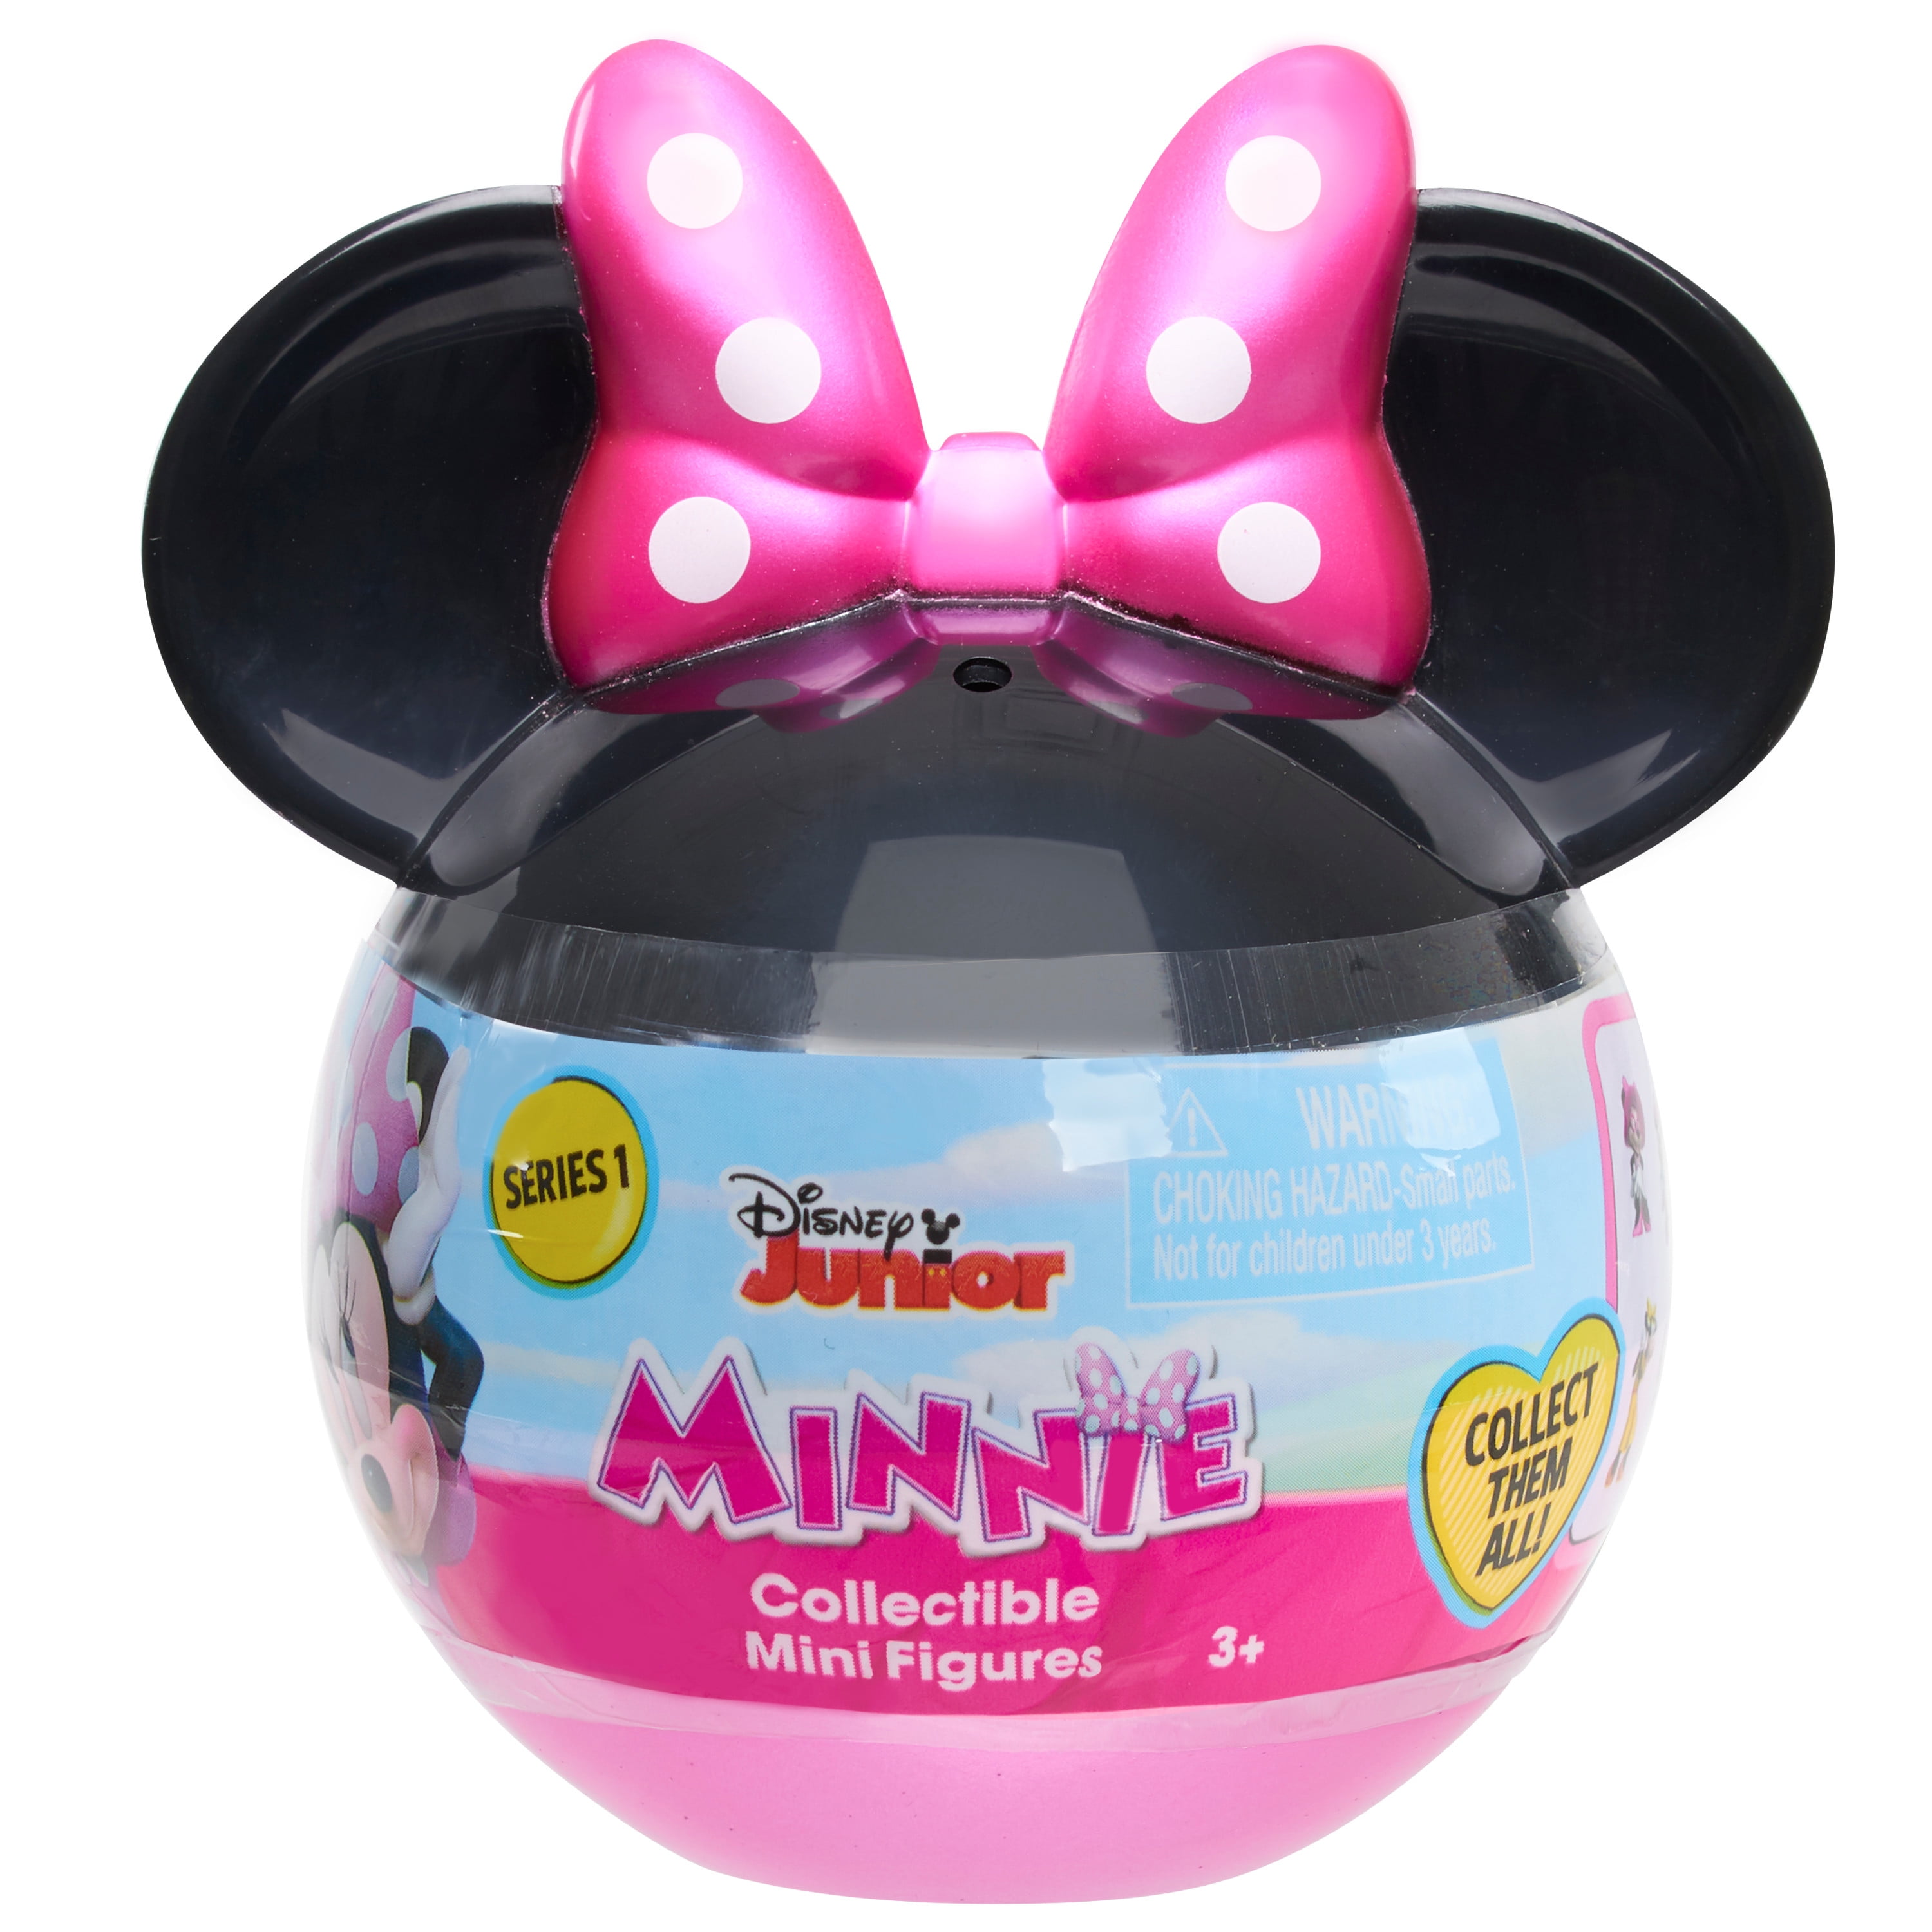 Minnie Mouse Collectible Mini Figure in Capsule, Styles May Vary, Party Favors and Gifts for Kids, Officially Licensed Kids Toys for Ages 3 Up, Gifts and Presents